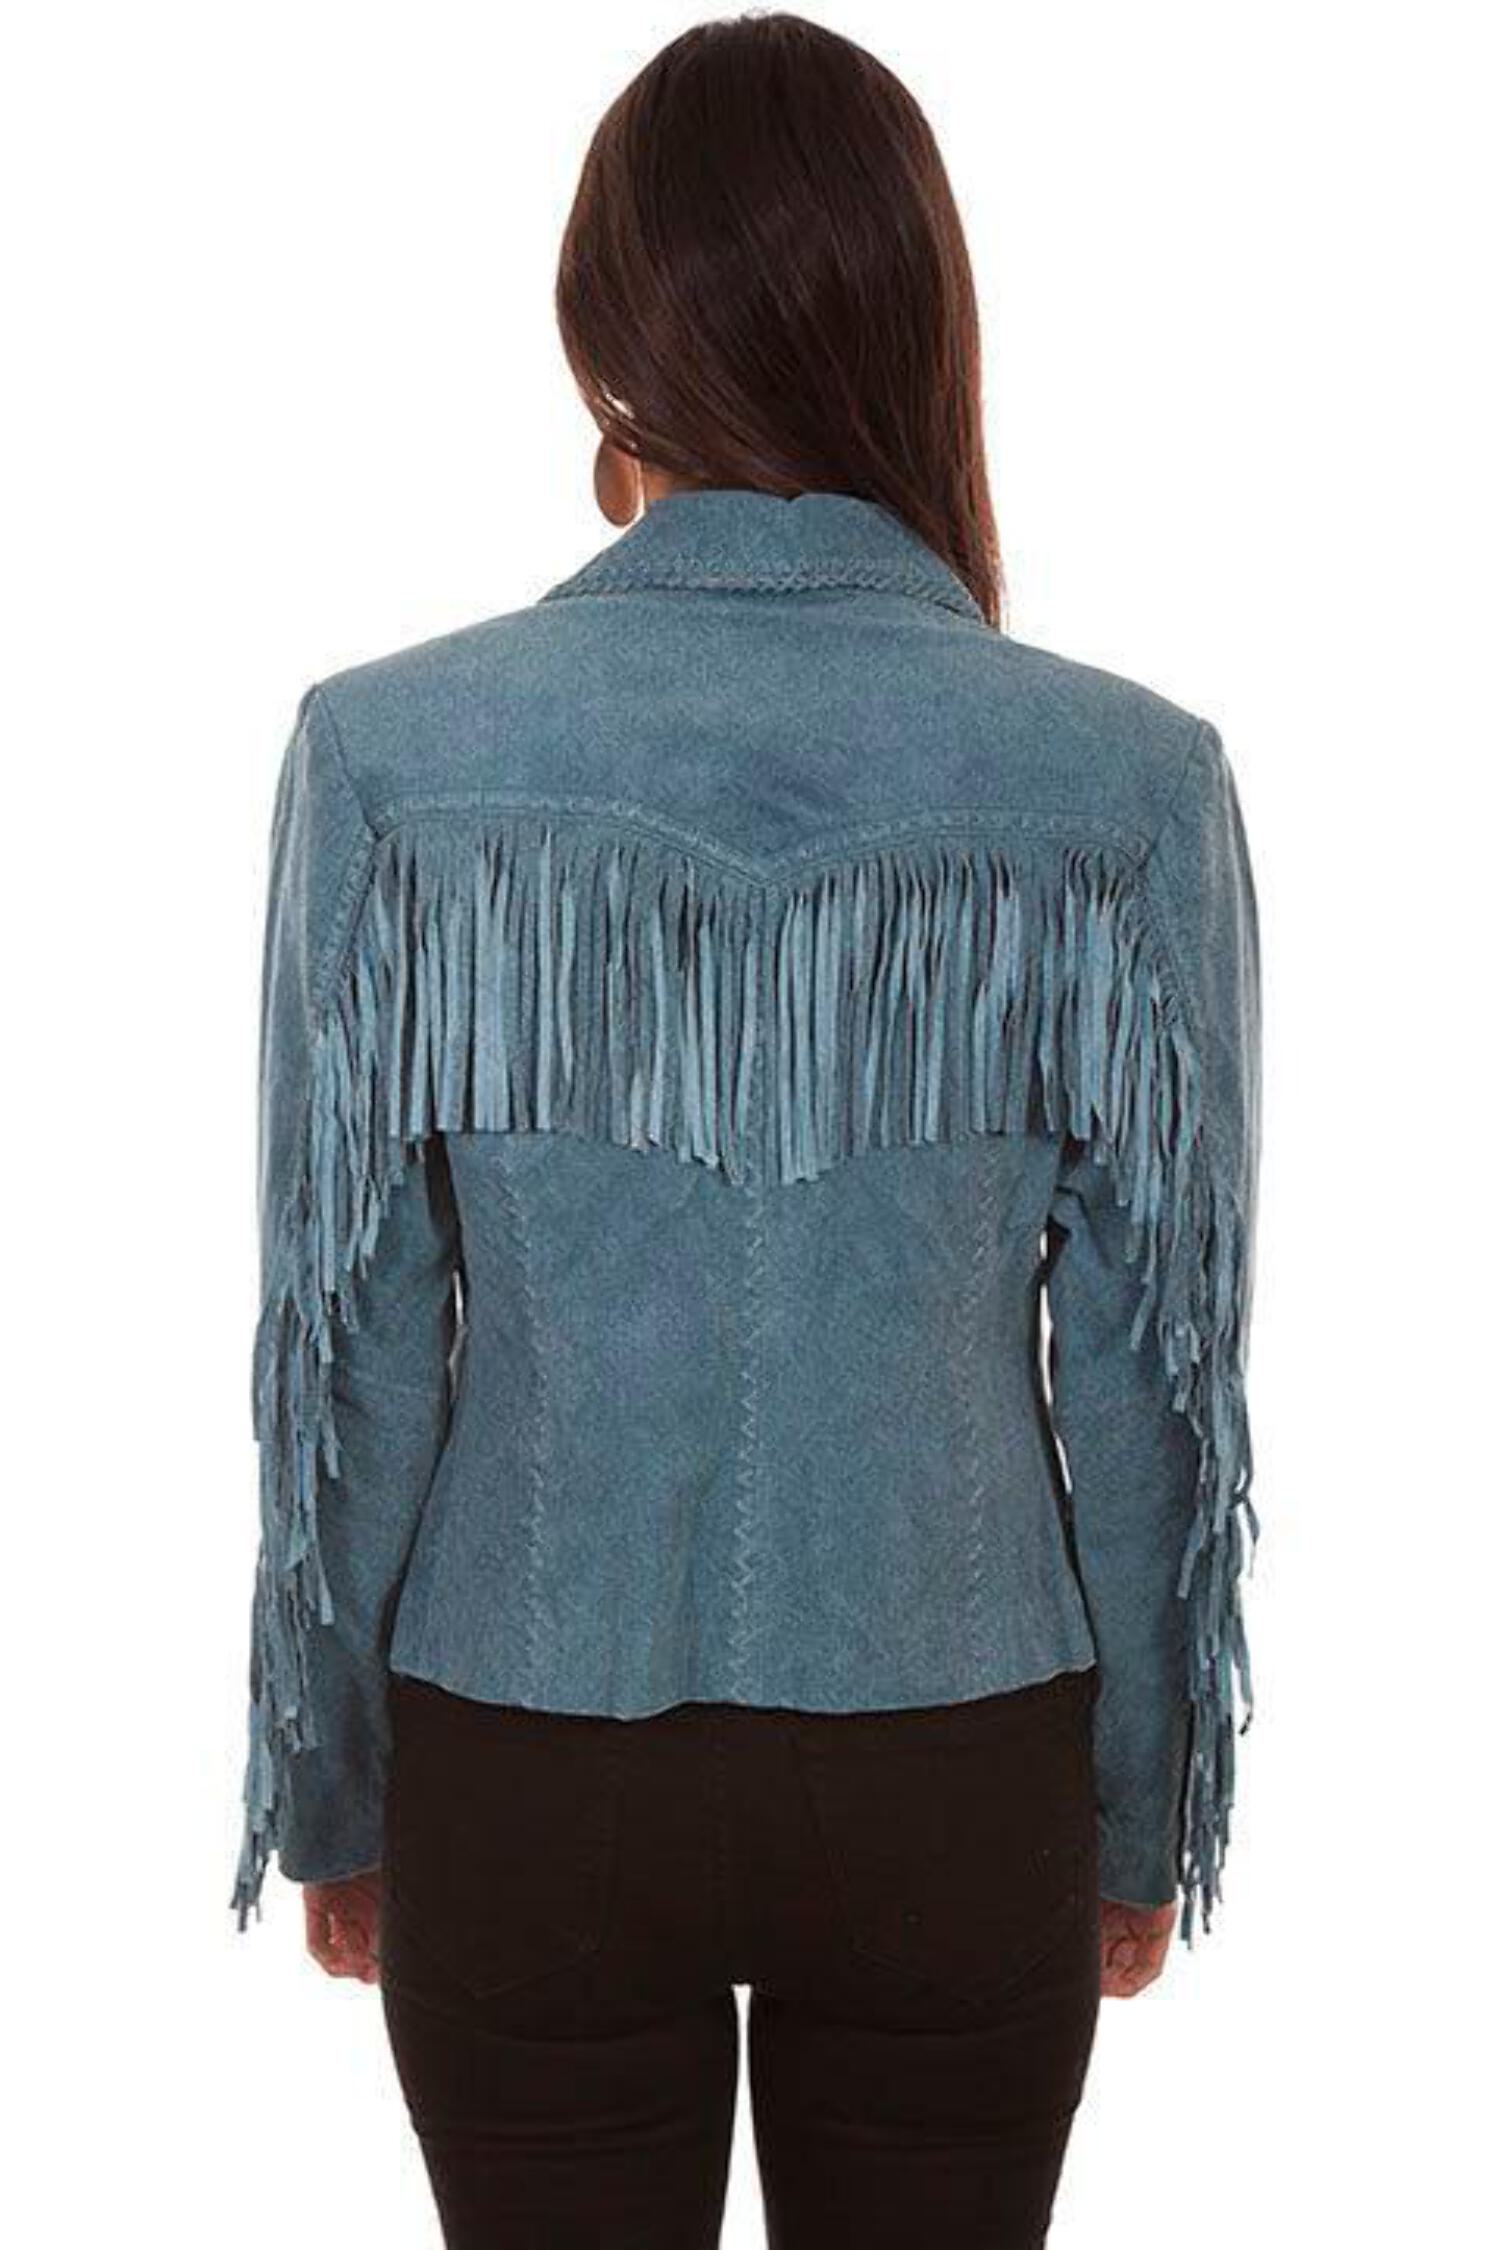 Scully L1016-193 S Suede Fringed Jacket&#44; Denim - Small - image 2 of 2